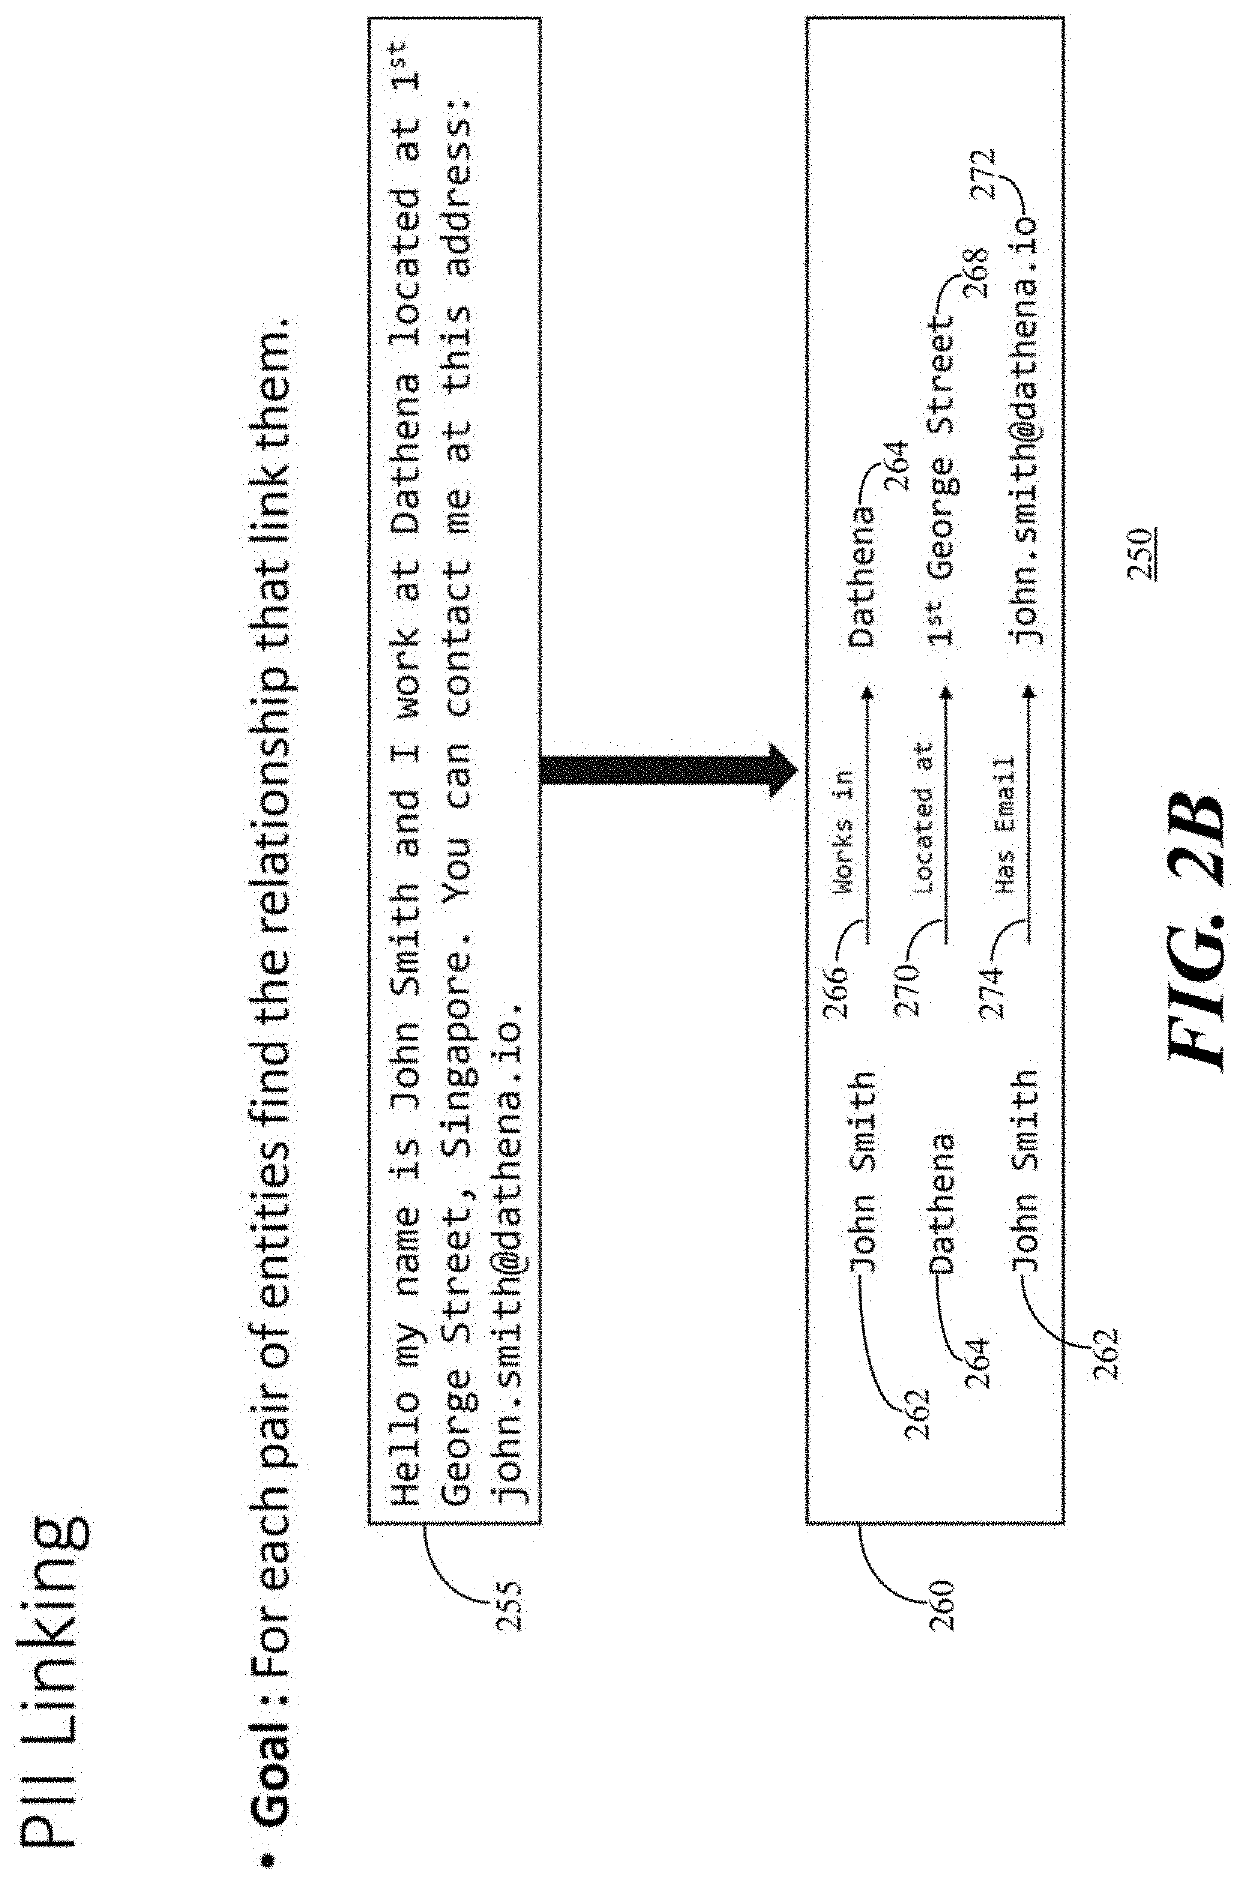 Methods, personal data analysis system for sensitive personal information detection, linking and purposes of personal data usage prediction